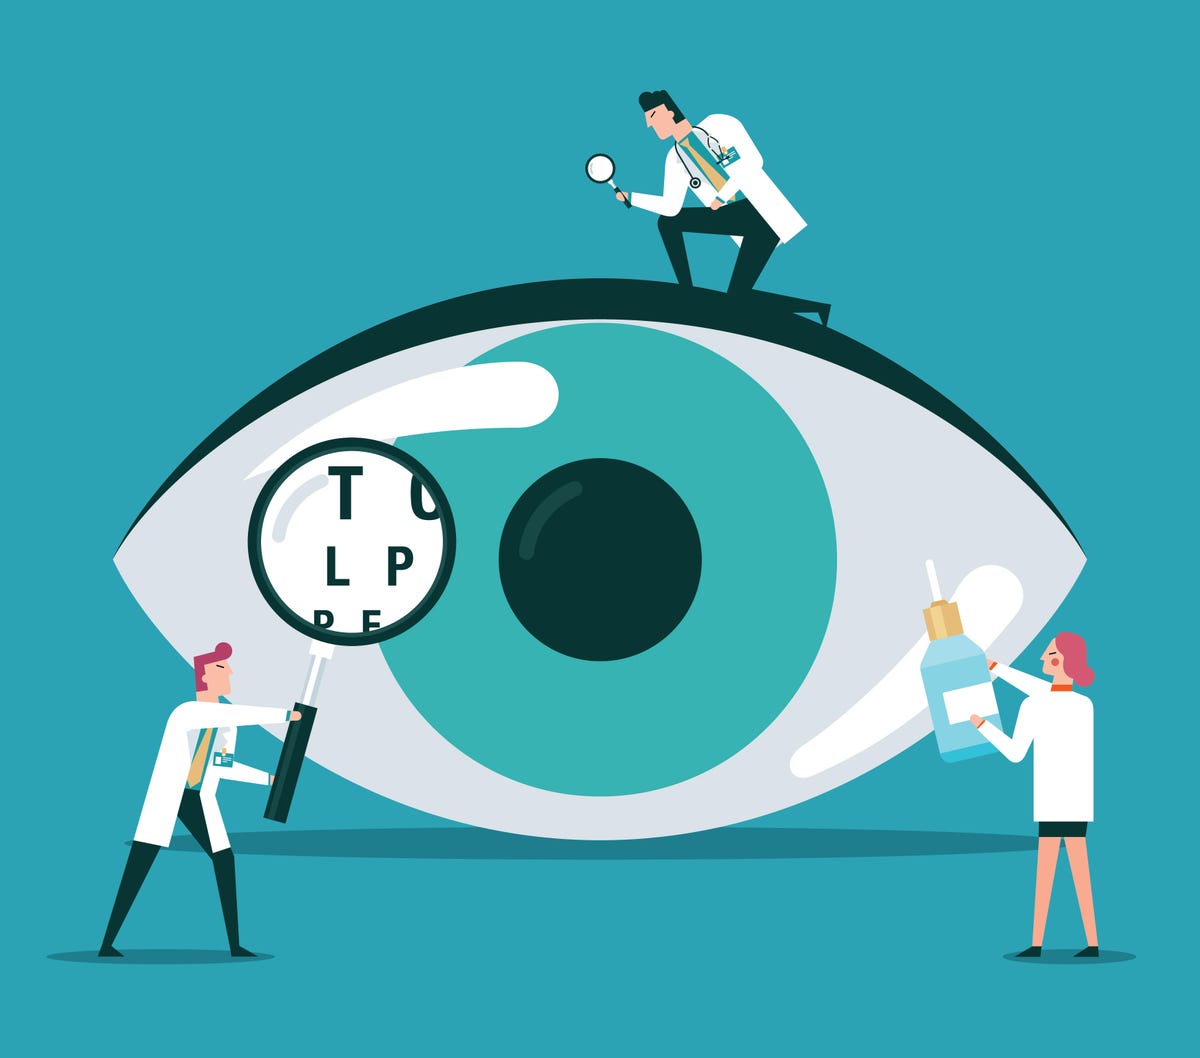 A big eye against an aqua background with three illustrated doctors checking it